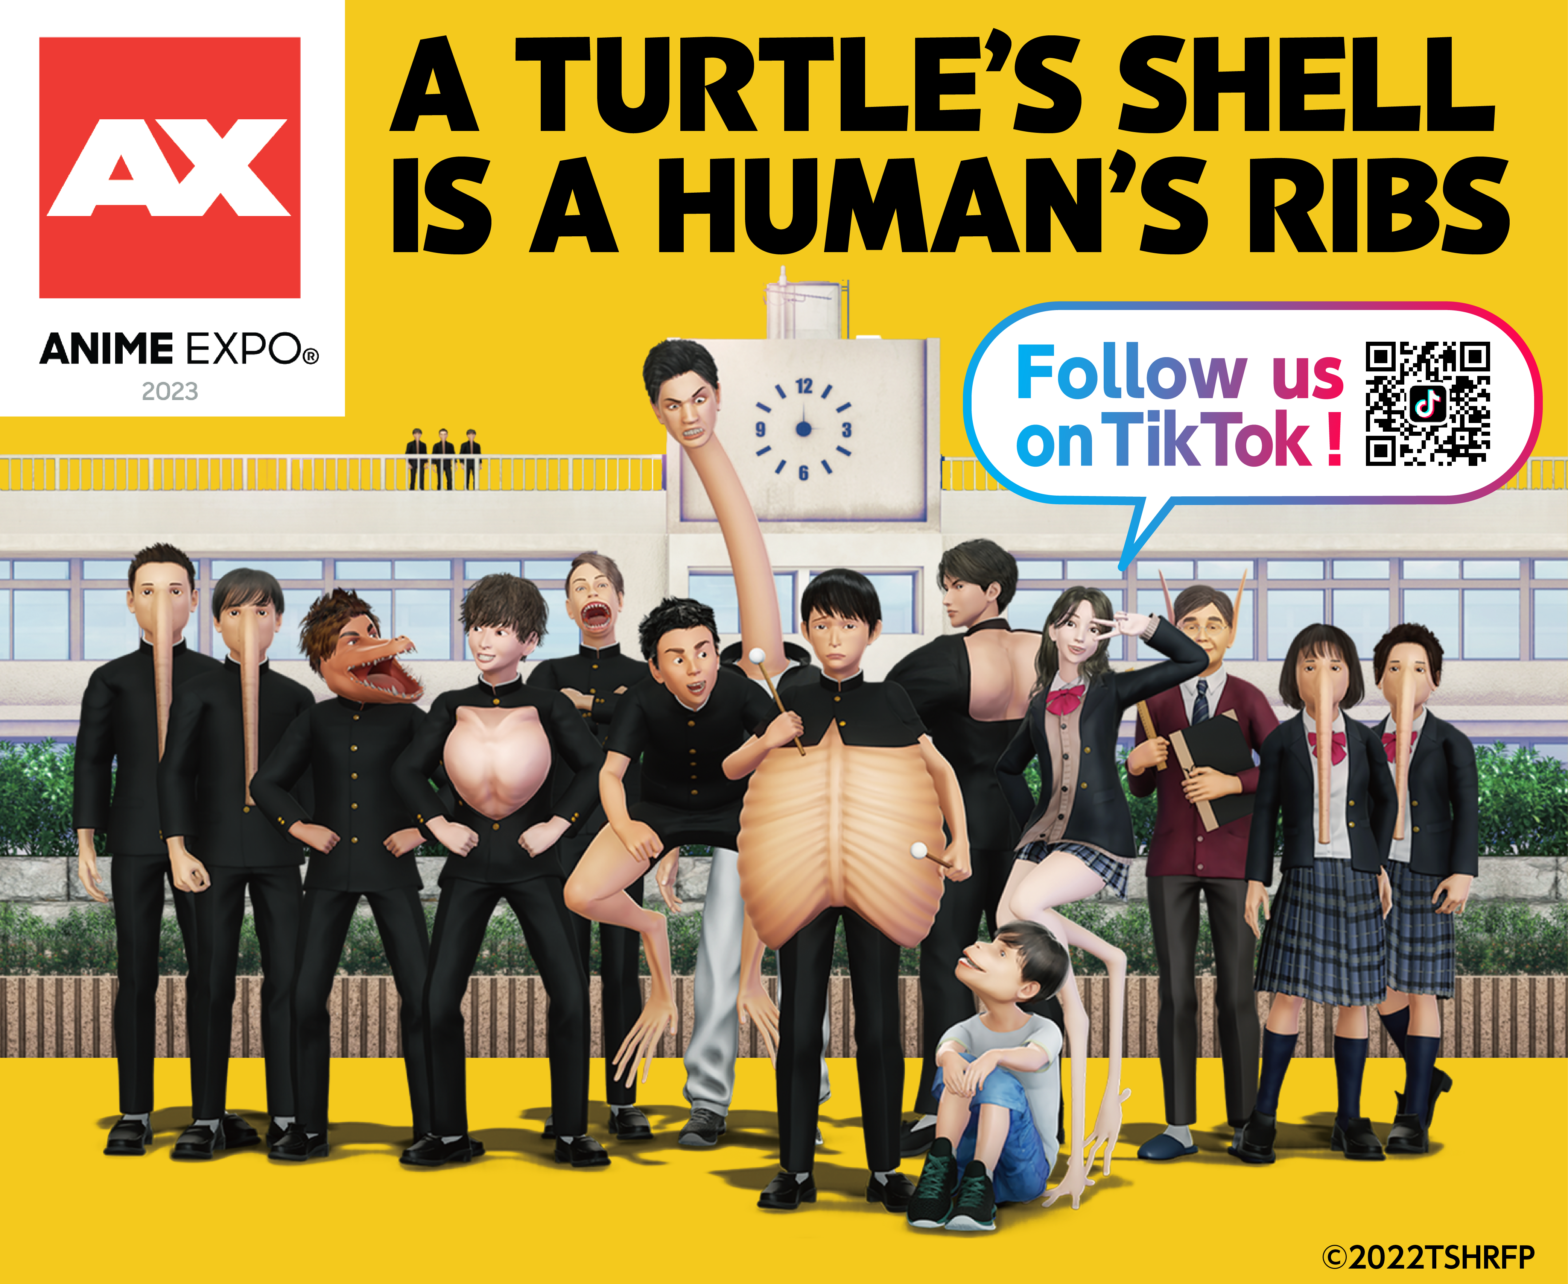 Mori Masa to appear at the screening of “A Turtle’s Shell is a Human’s Ribs” at Anime Expo 2023.